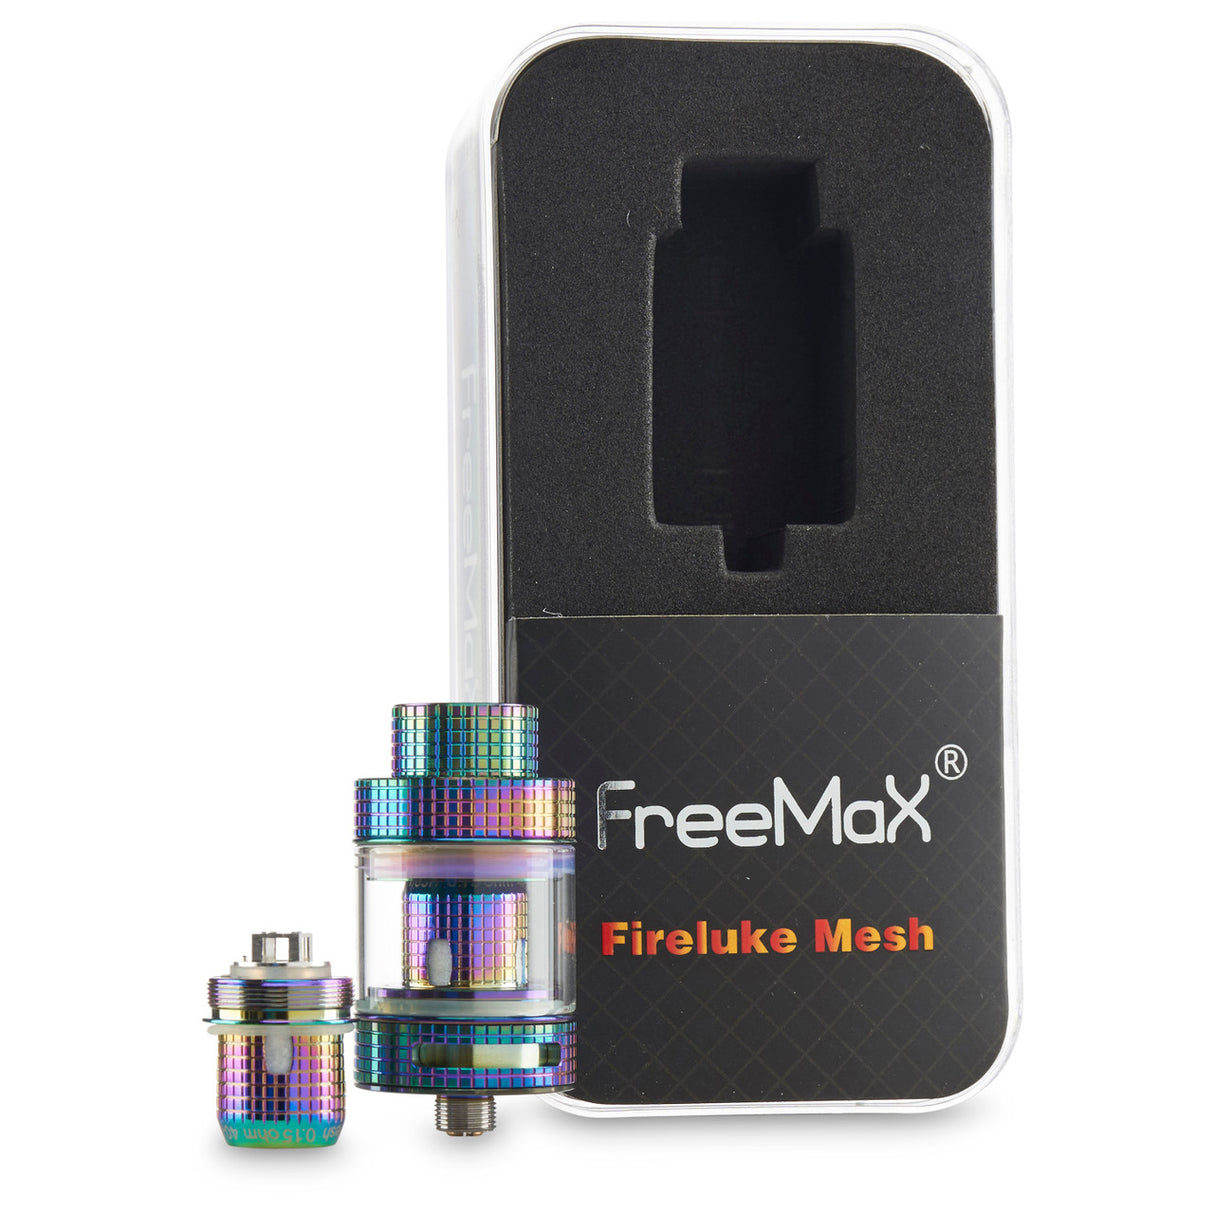 freemax fireluke mesh sub phm tank with extra glass and extra coils